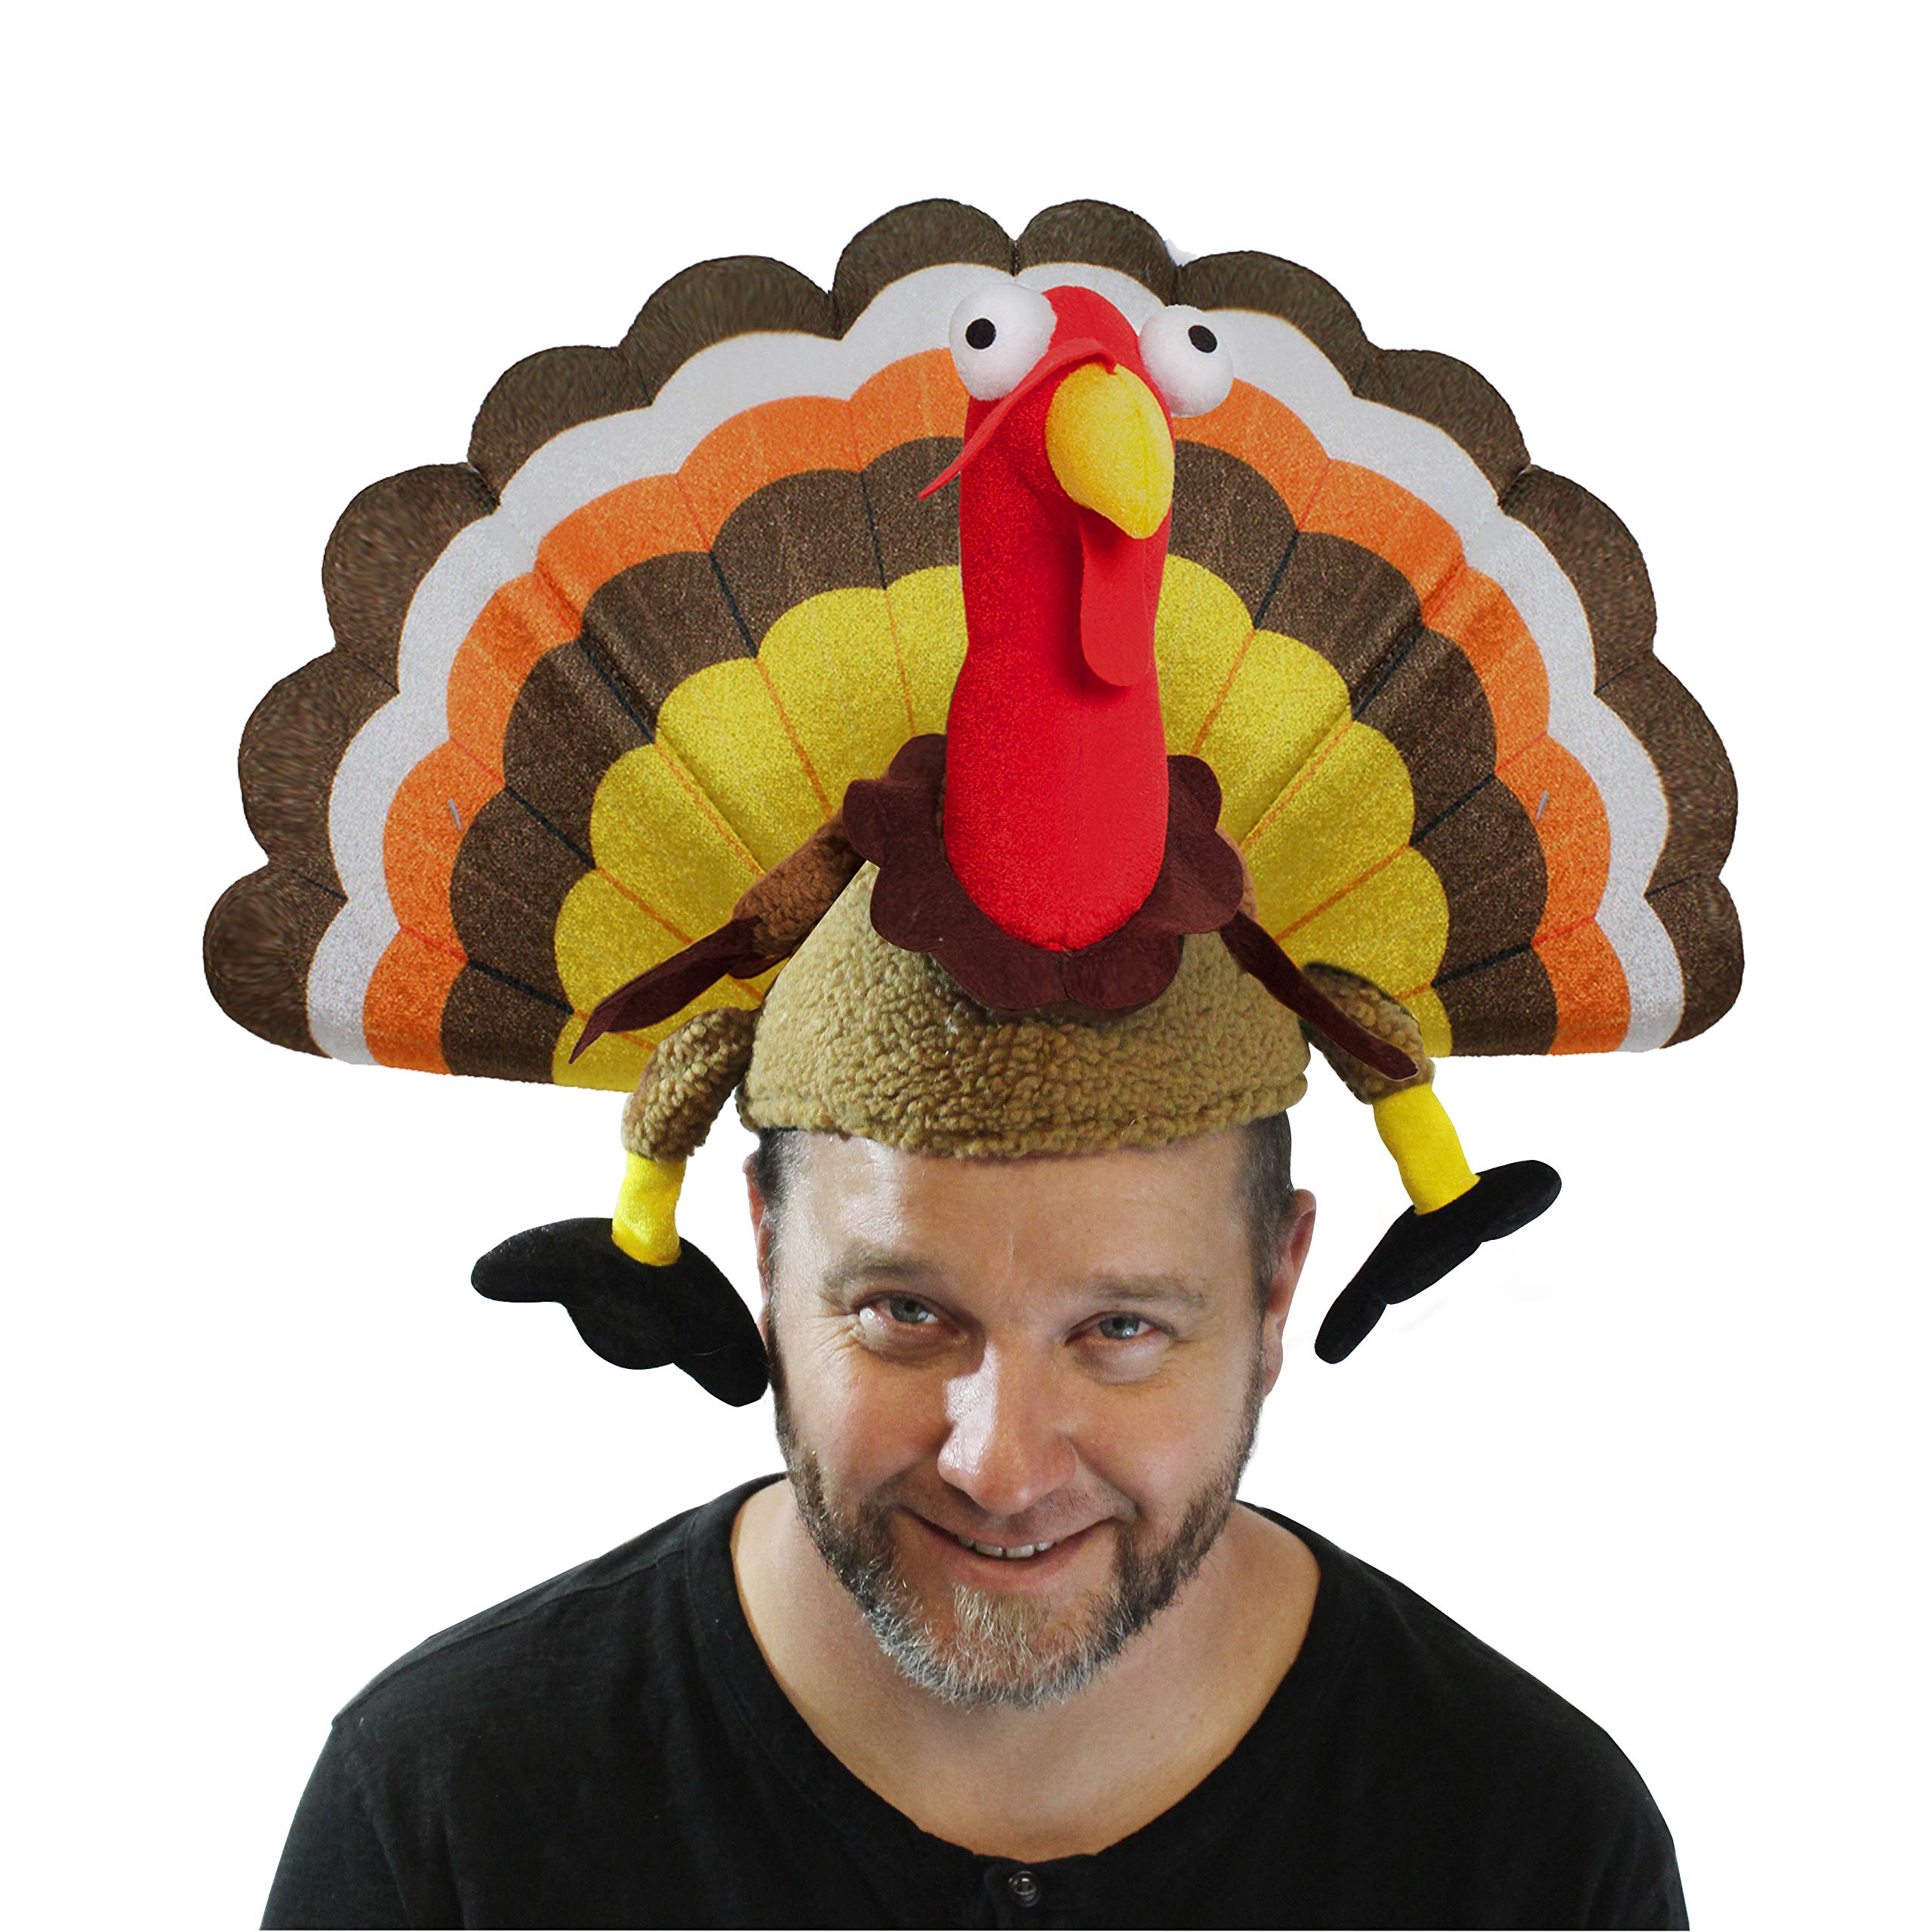 Spooktacular 2 Pack Thanksgiving Turkey Hats Turkey Cap for Thanksgiving Night Event Dress-up Party Role Play Carnival Cosplay Costume Accessories Multi-colores - image 5 of 7